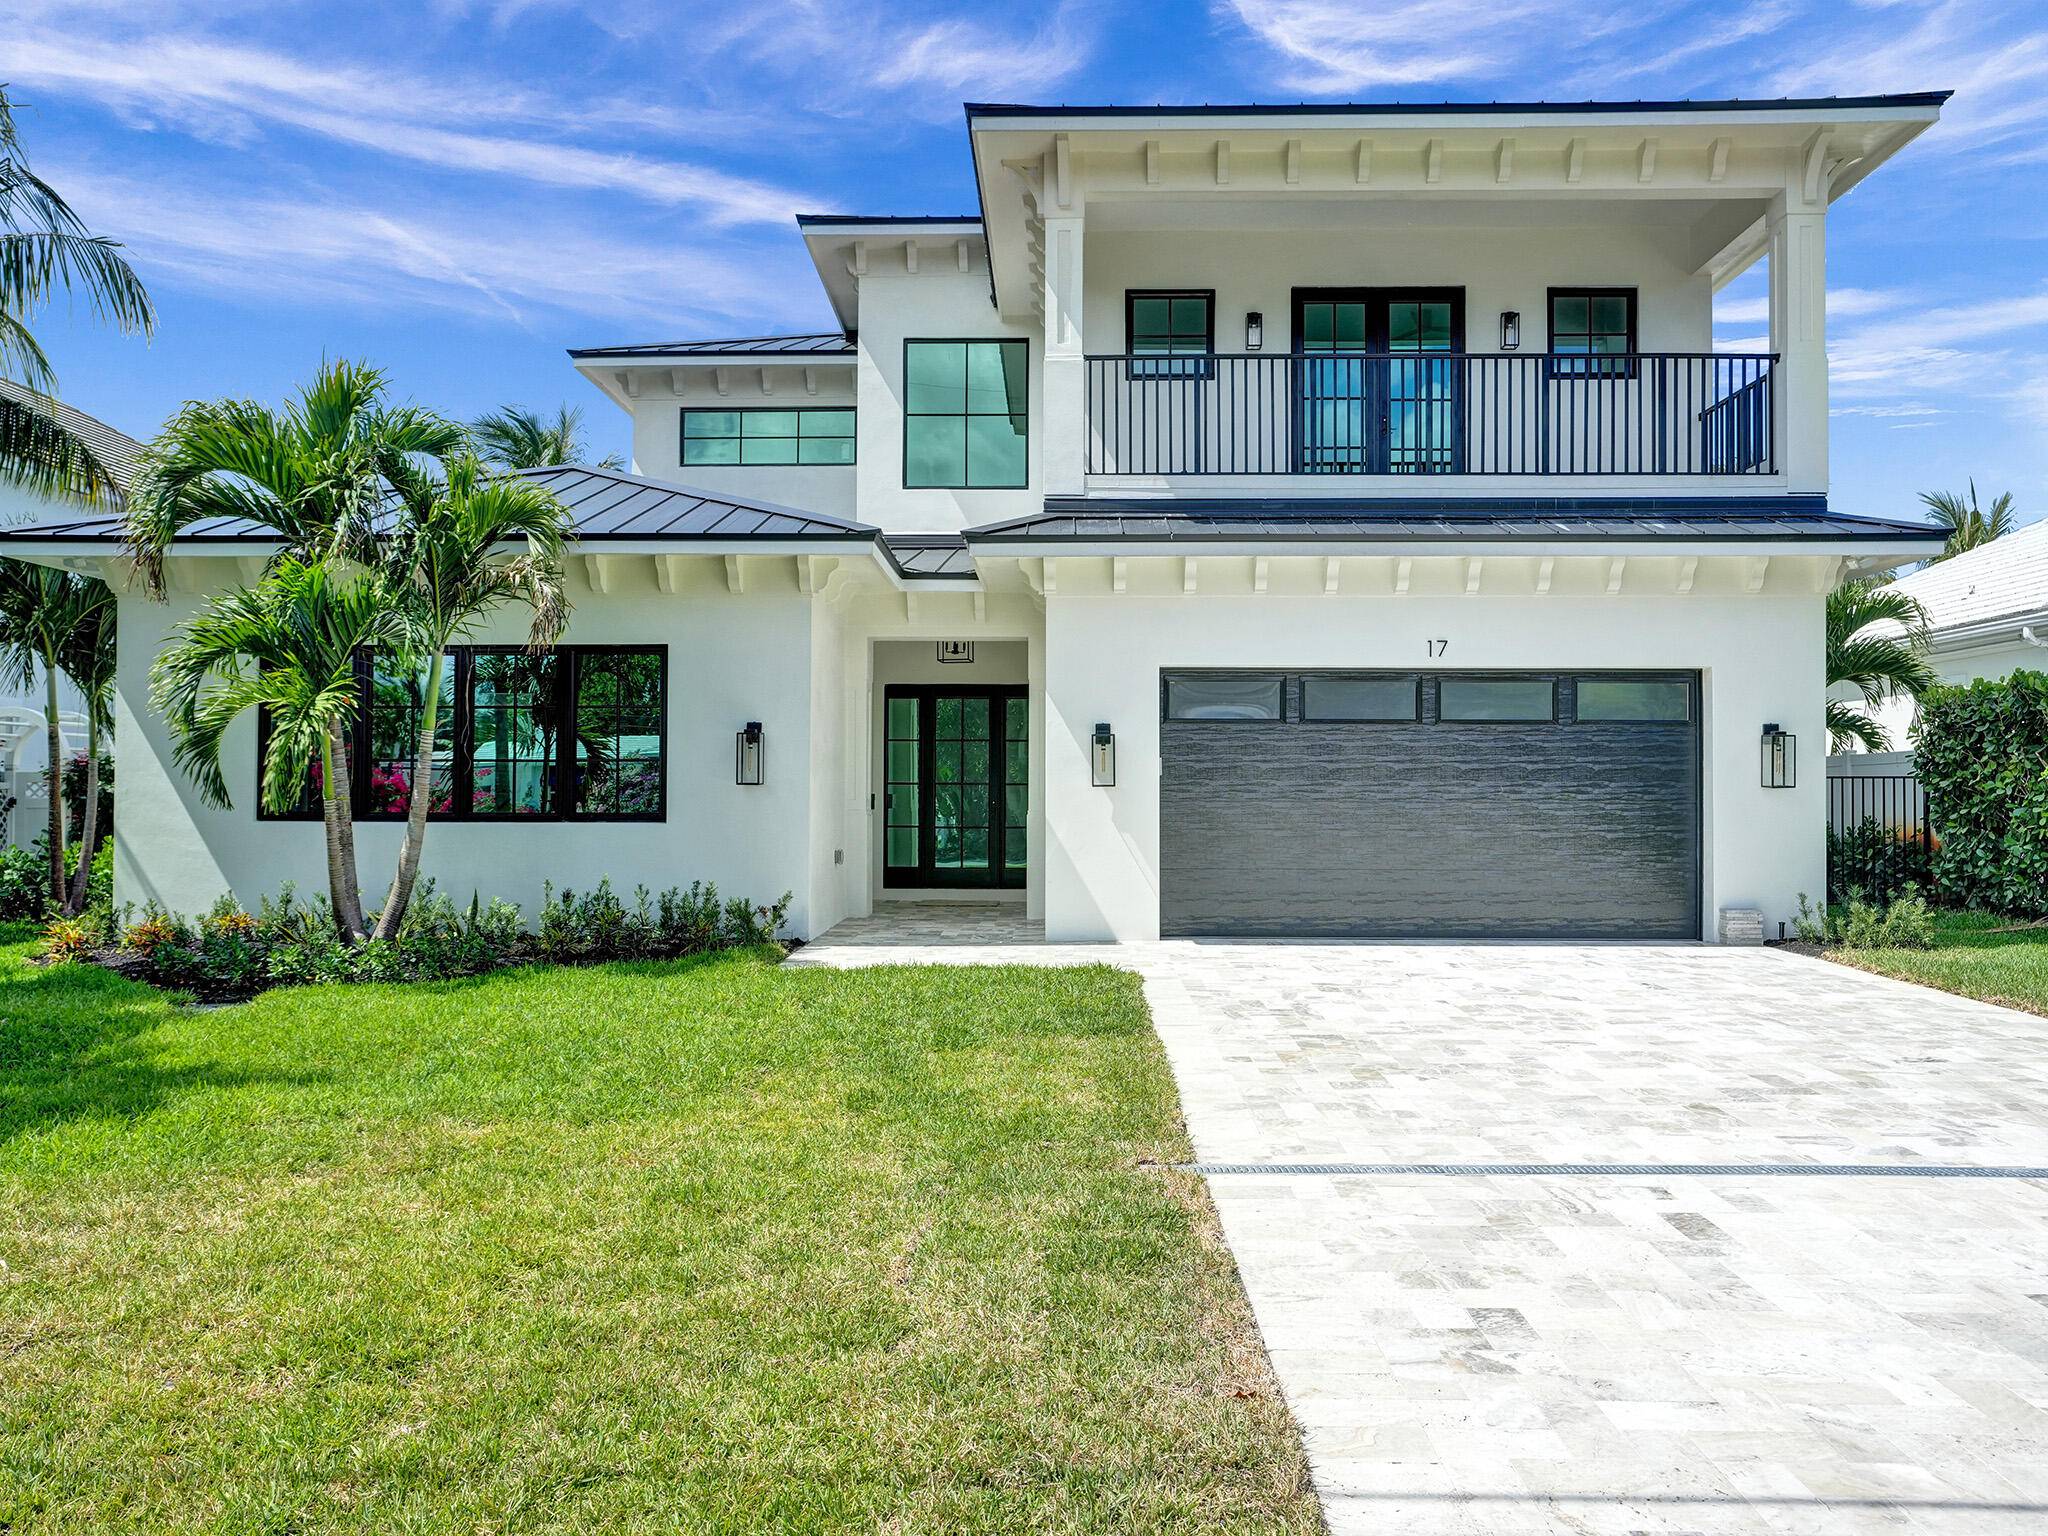 Newly built stunning Contemporary Key West custom home in the sought after Lake Ida neighbourhood of Delray Beach, steps away from Pineapple Grove a short drive to the beach.